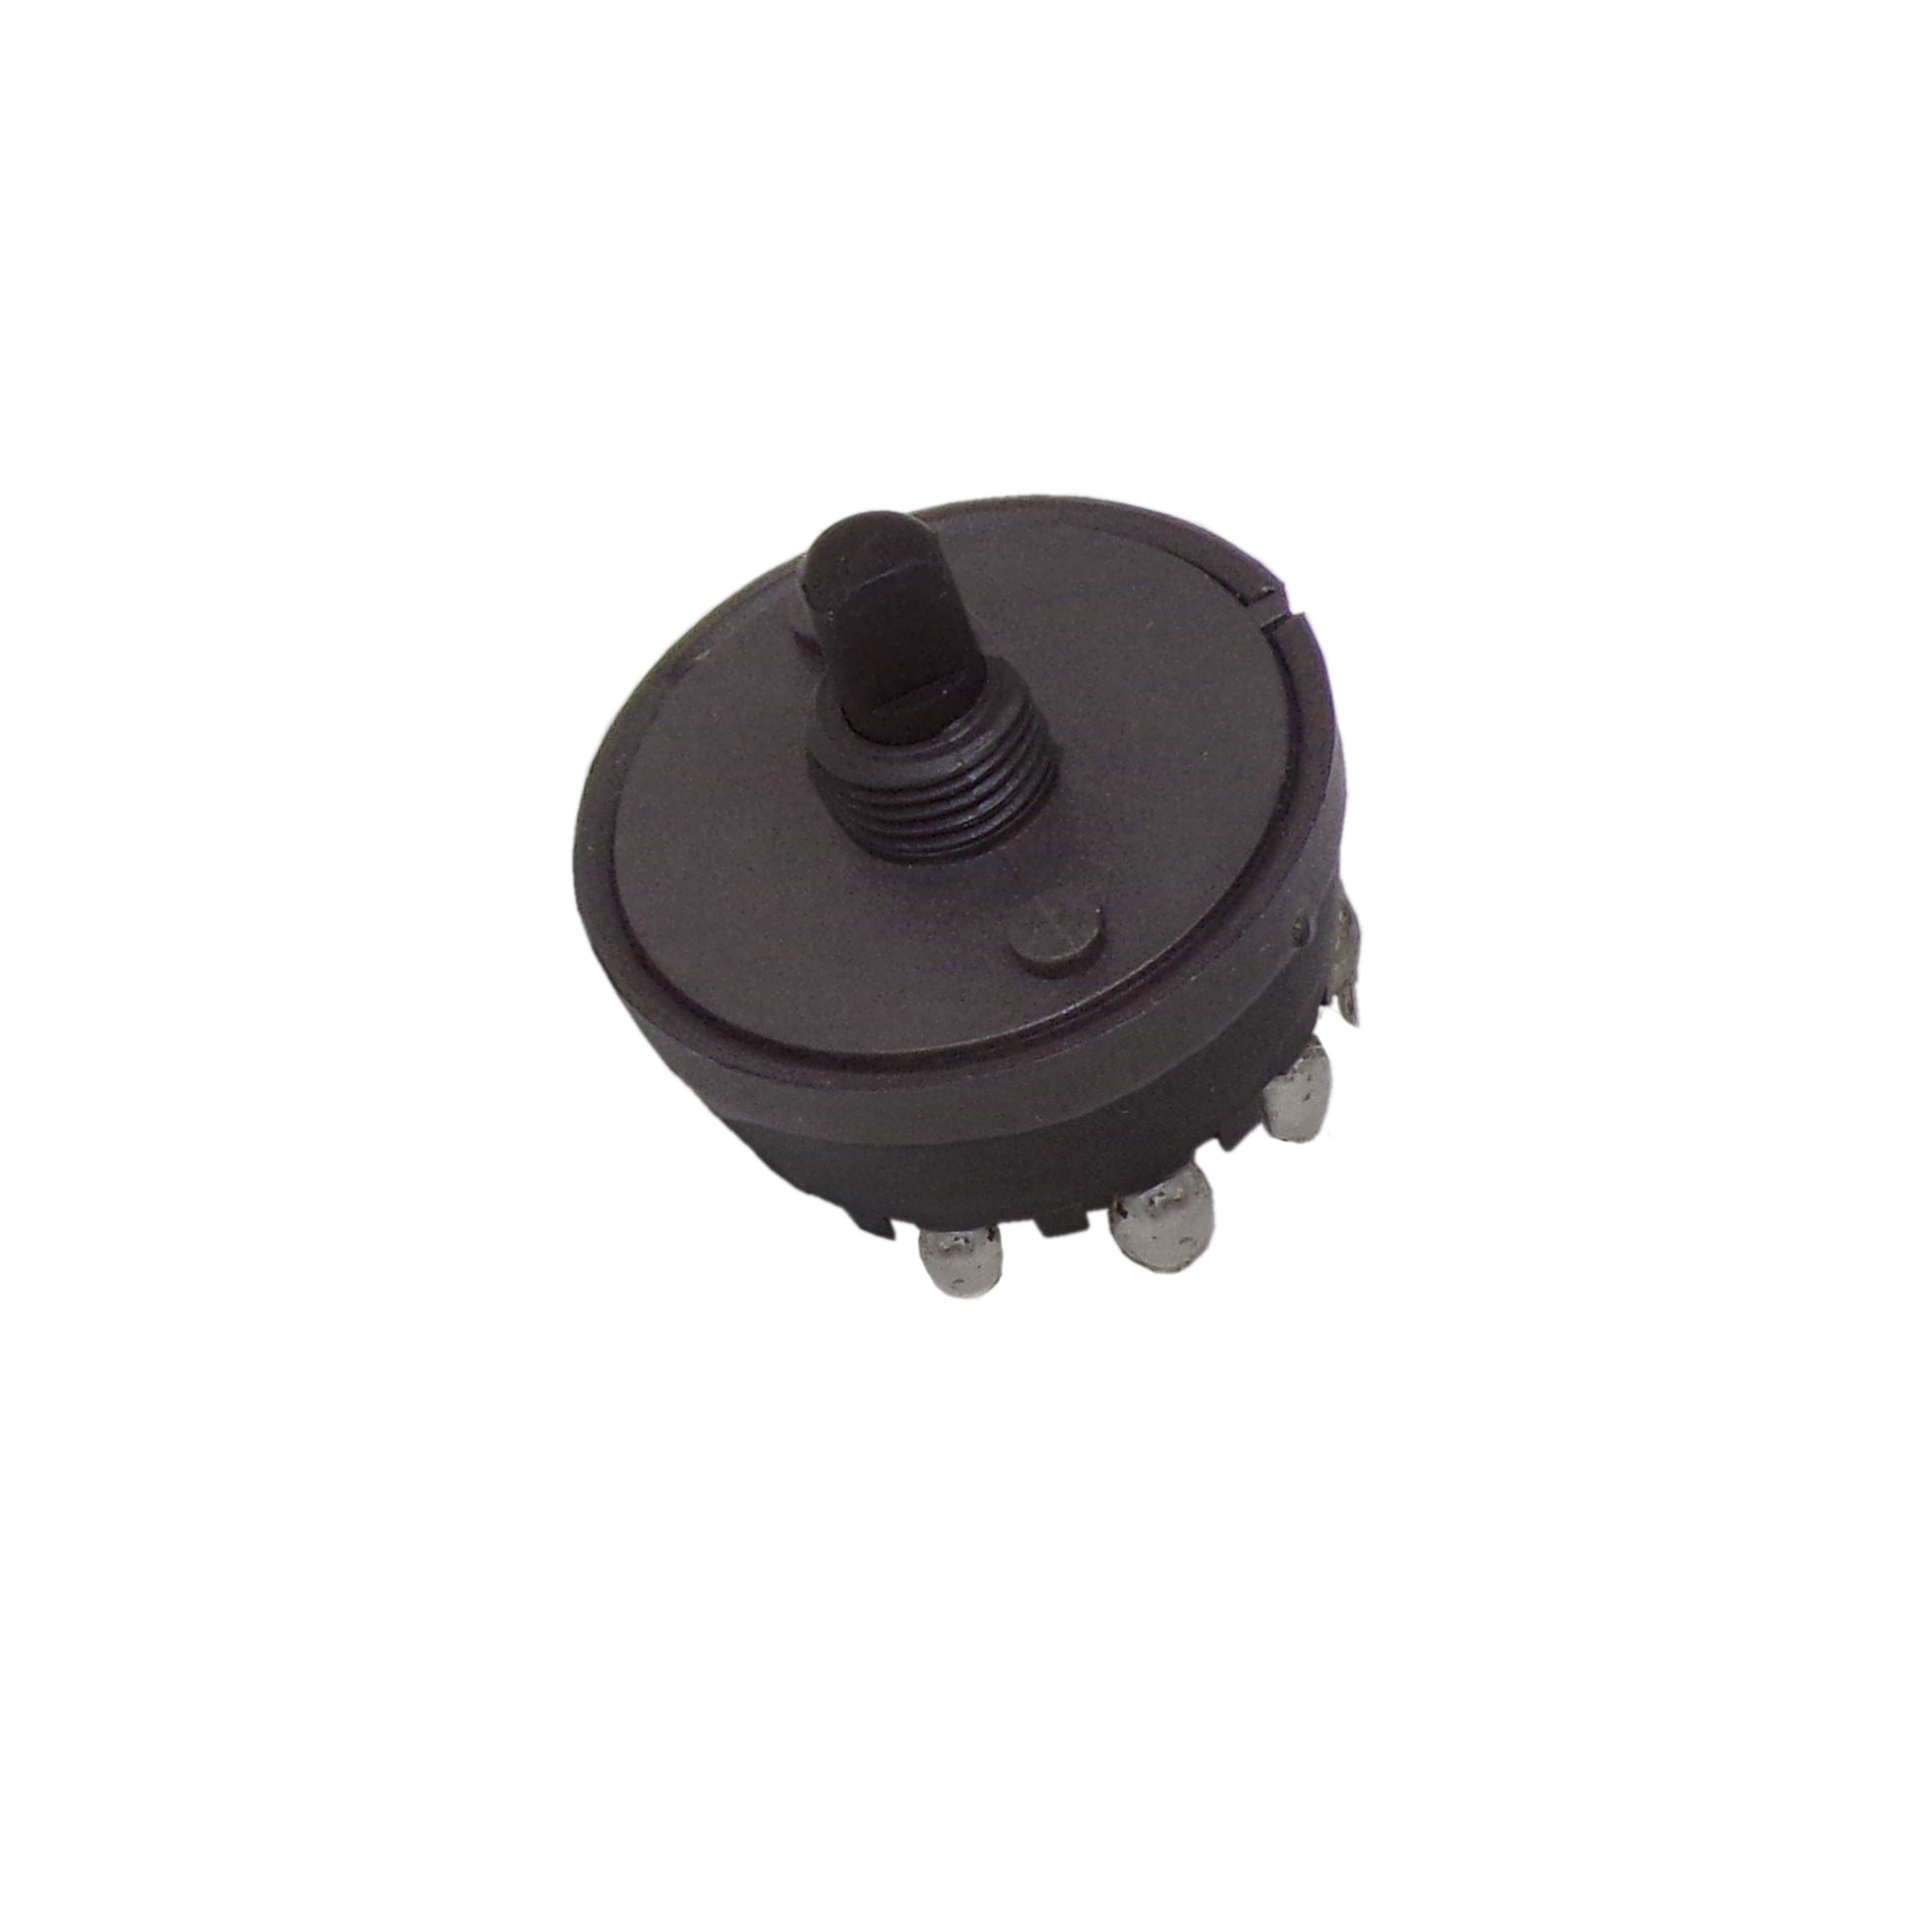 5 Speed Switch for FC-420 Air Circulator